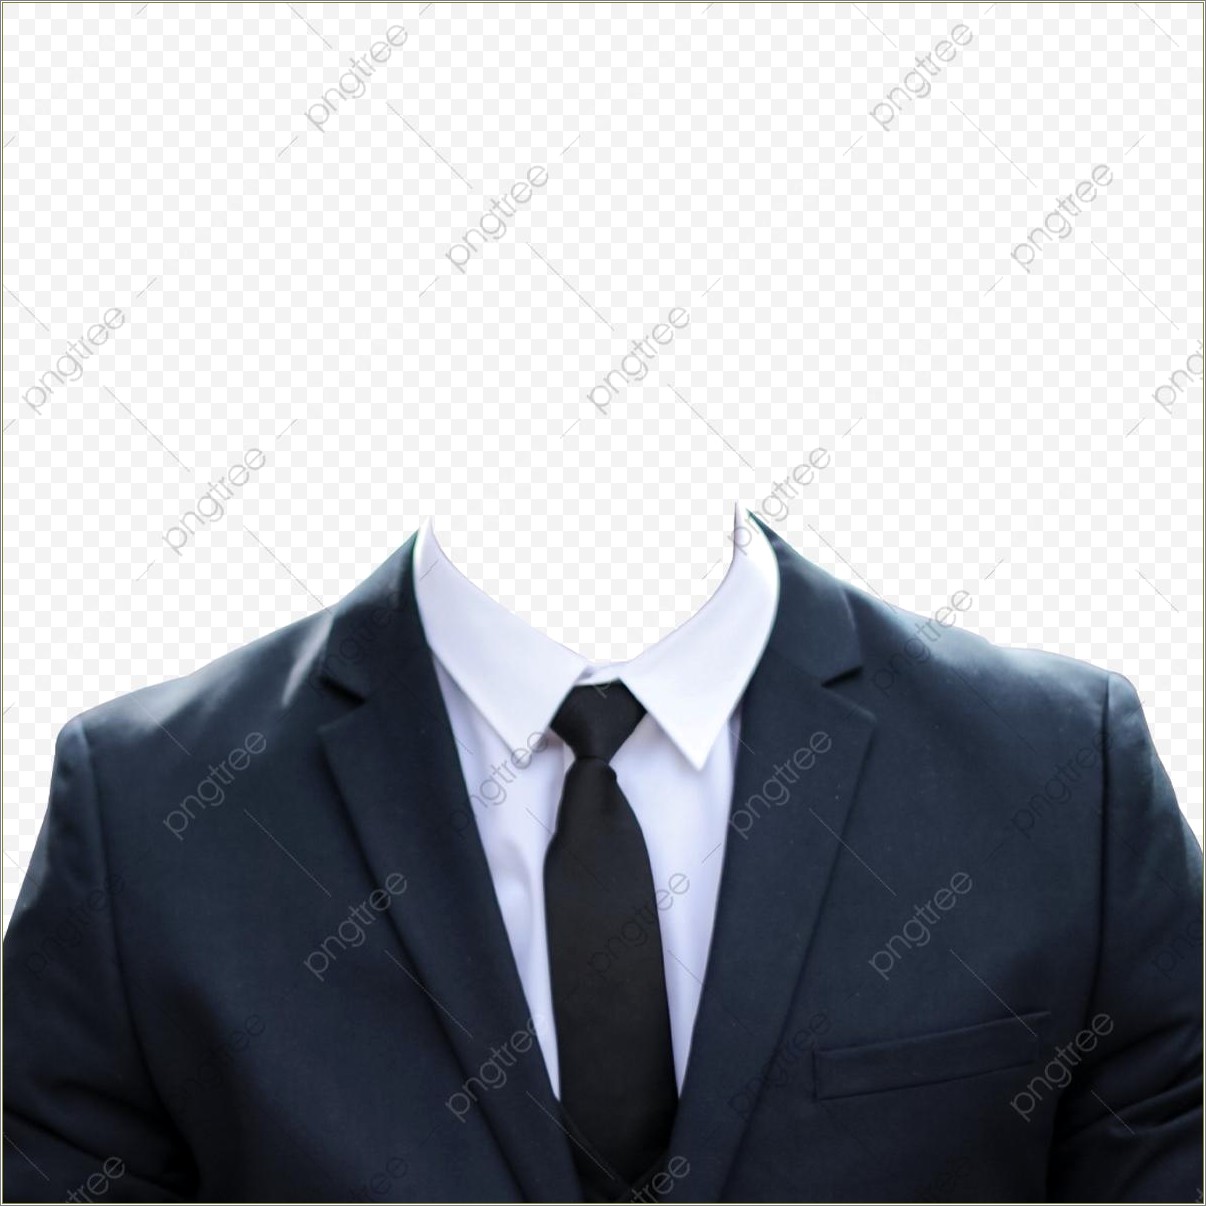 Coat And Tie Template Free Download